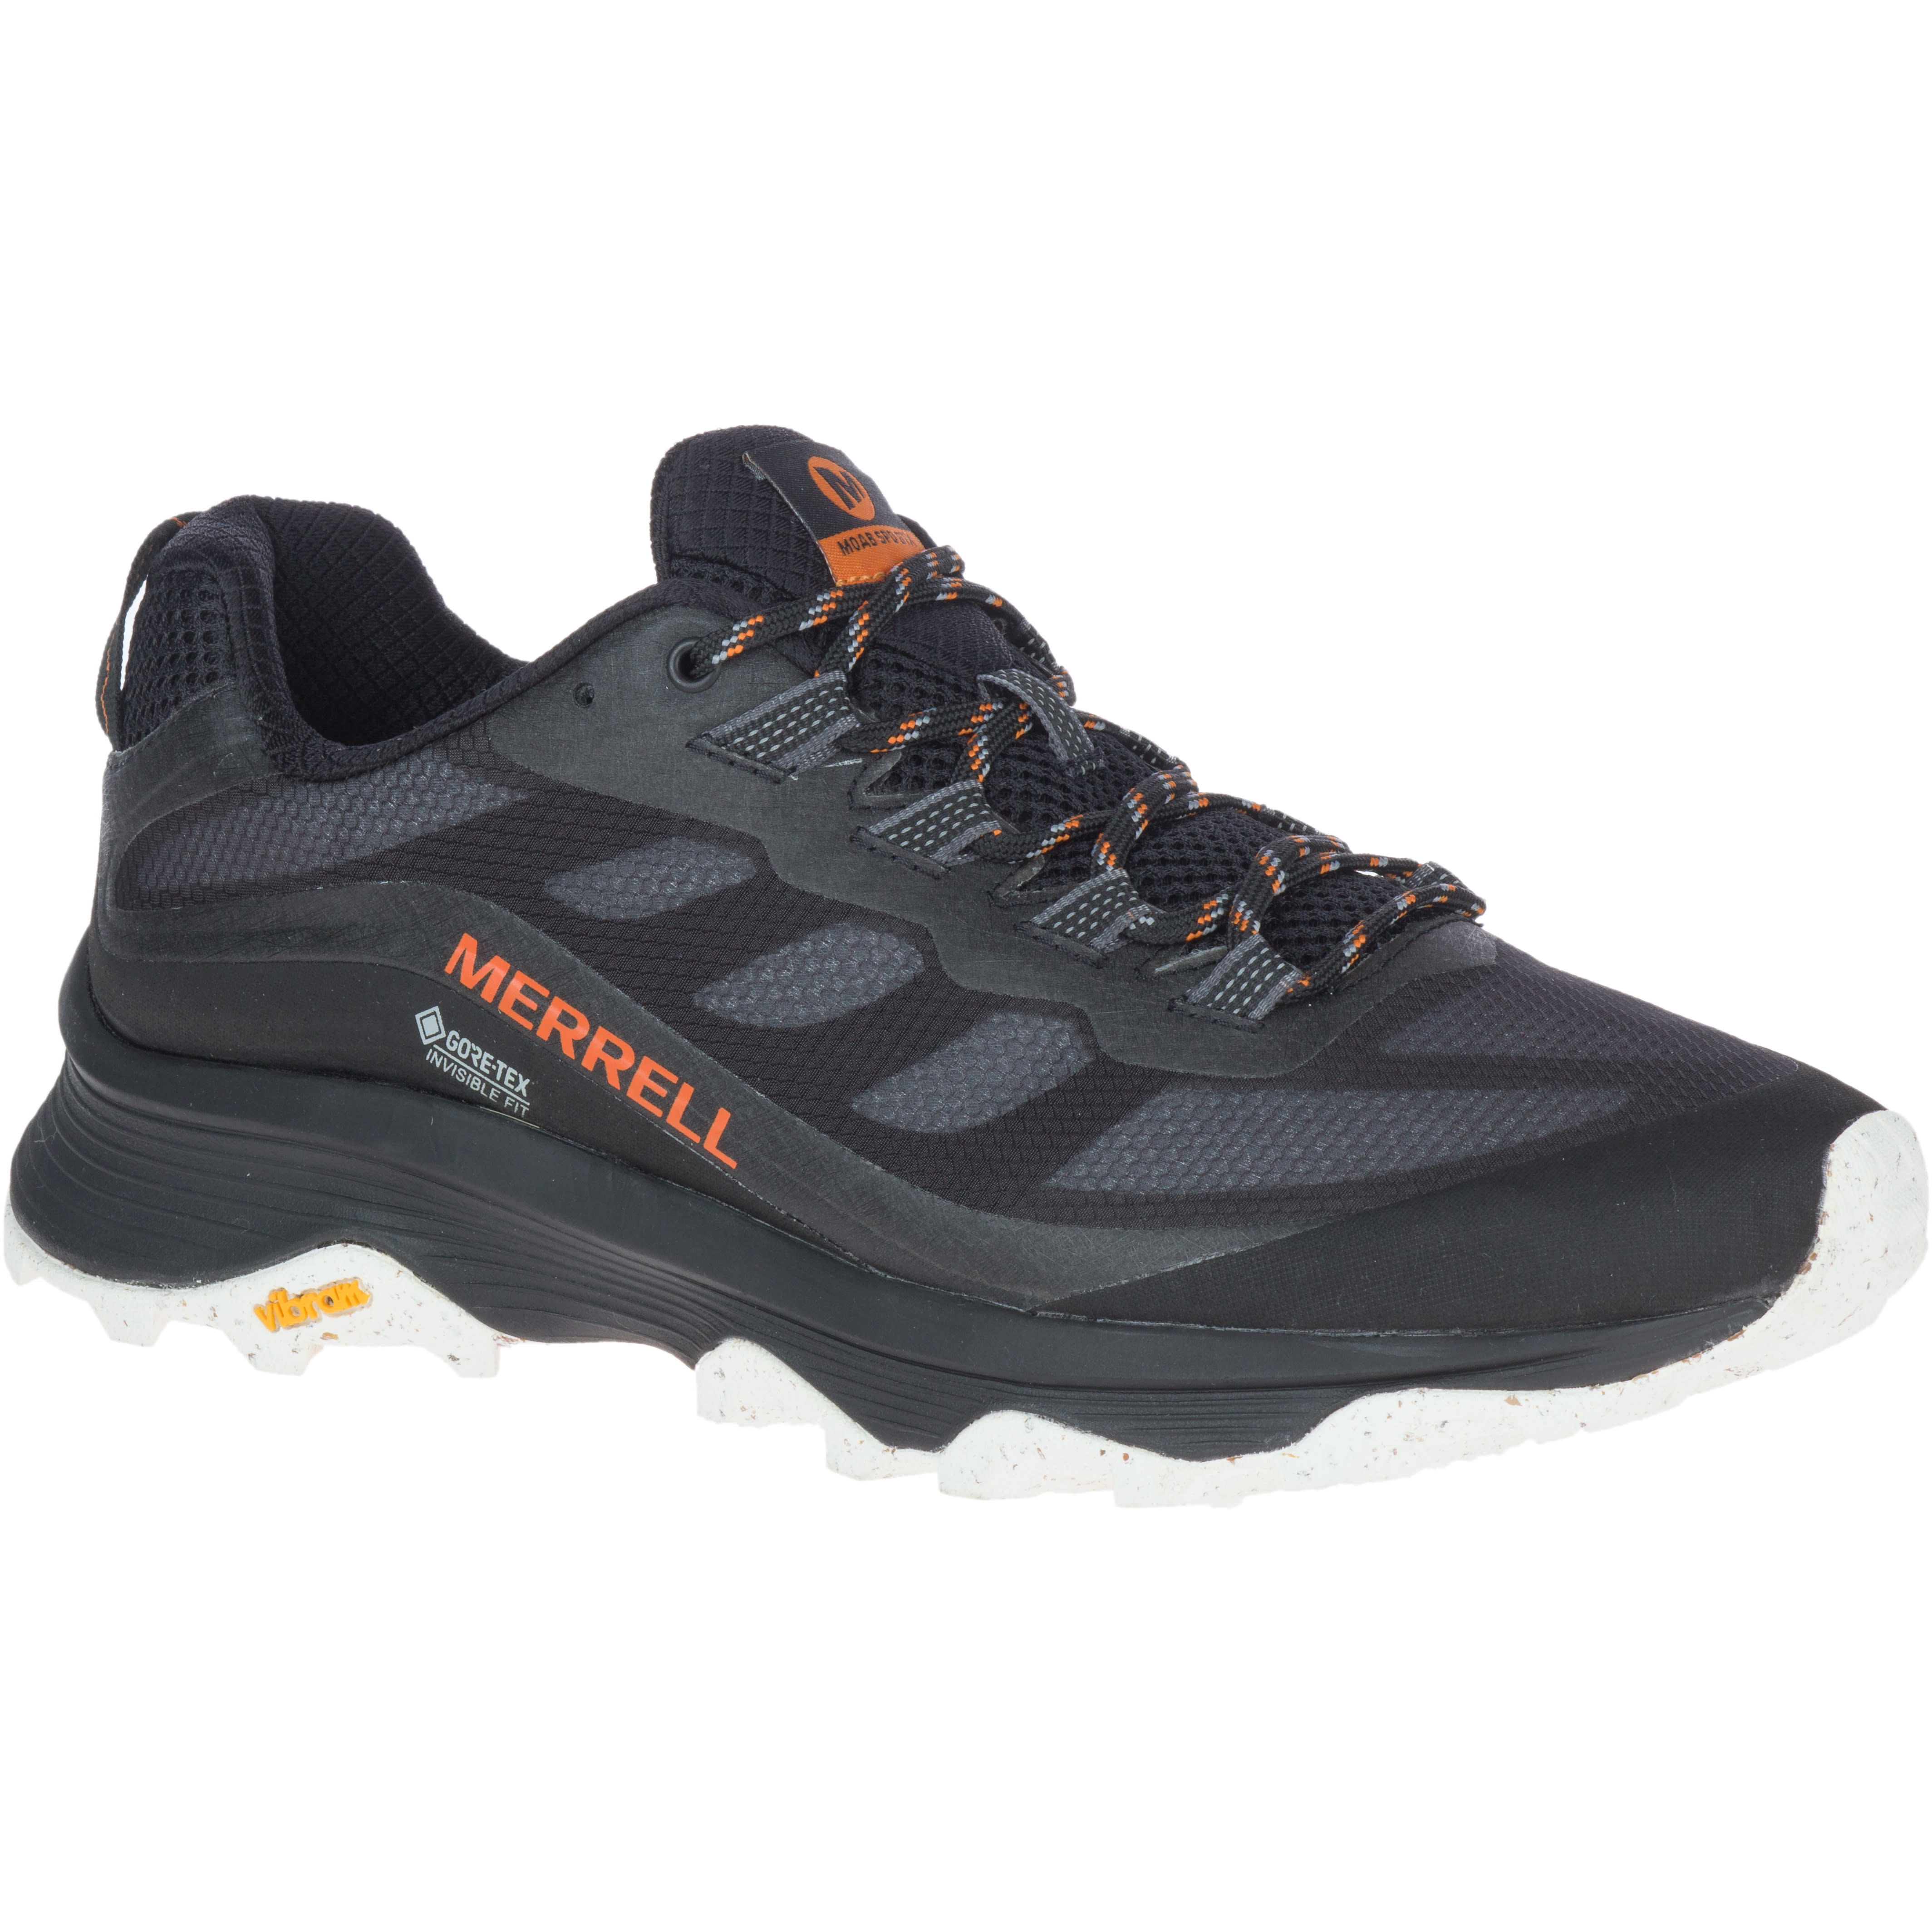 Buy Merrell Men's Moab Speed Gore-Tex from Outnorth